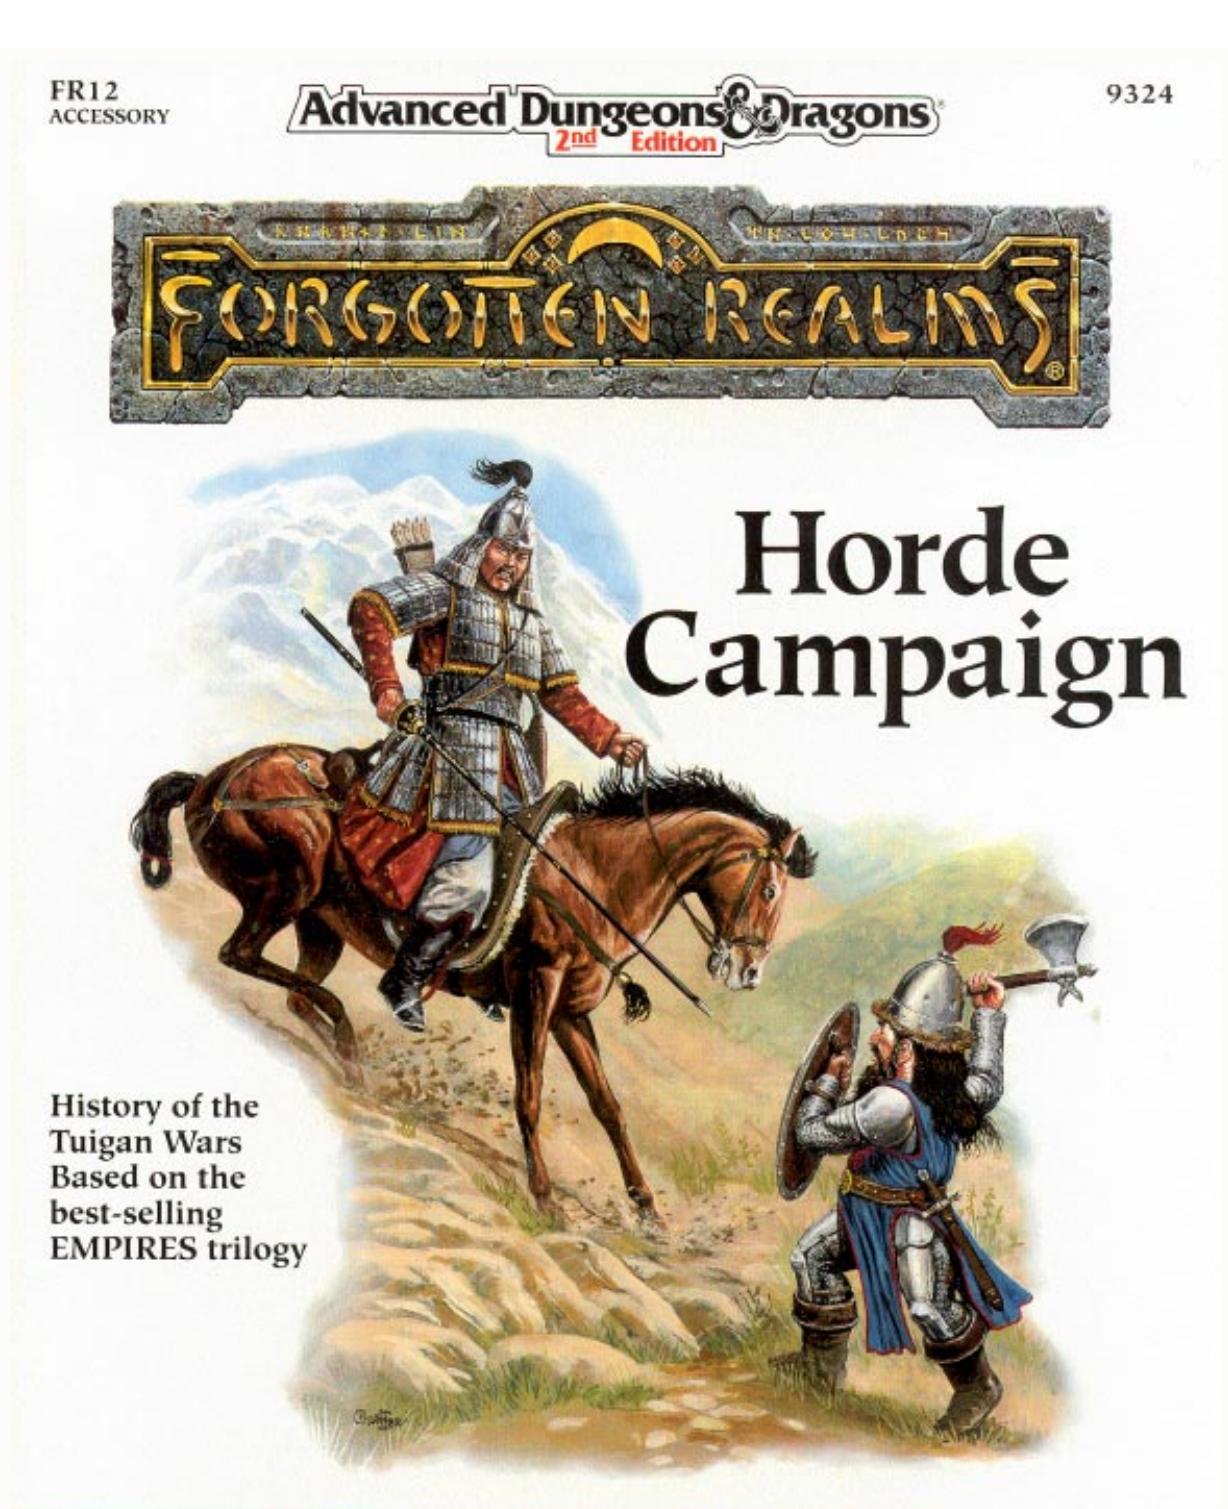 Horde Campaign